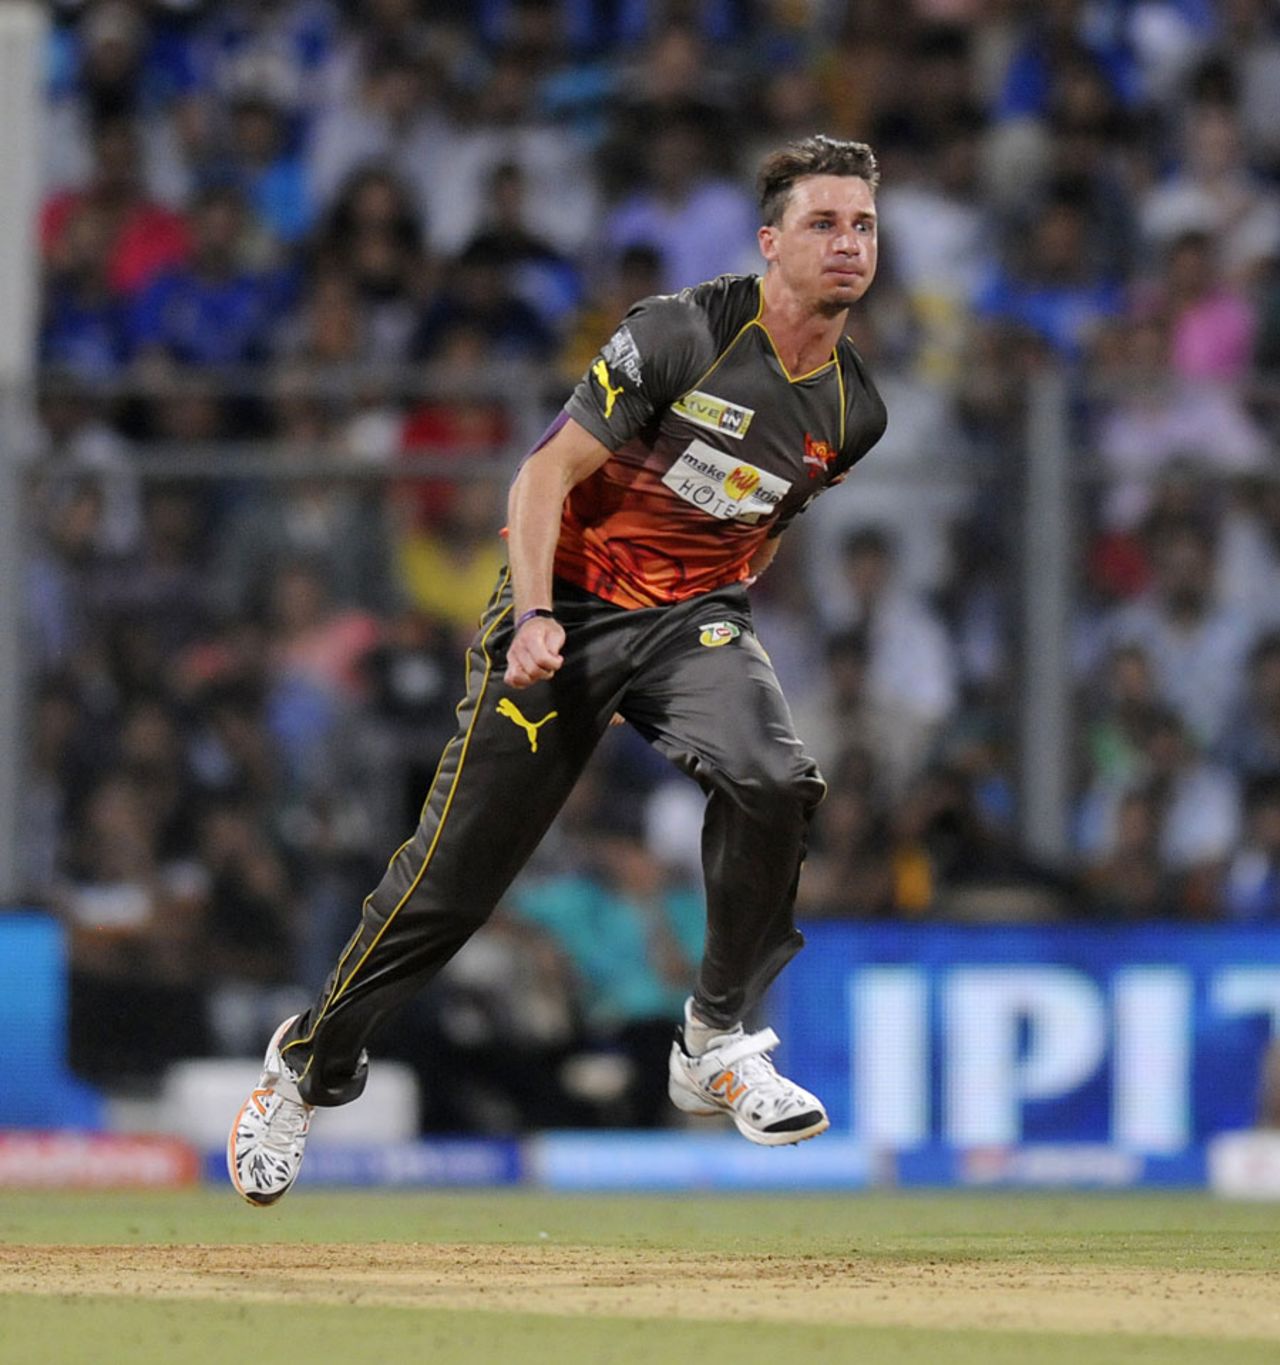 Dale Steyn was the best bowler for Sunrisers Hyderabad, conceding 23 runs in four overs, Mumbai Indians v Sunrisers Hyderabad, IPL 2013, Mumbai, May 13, 2013